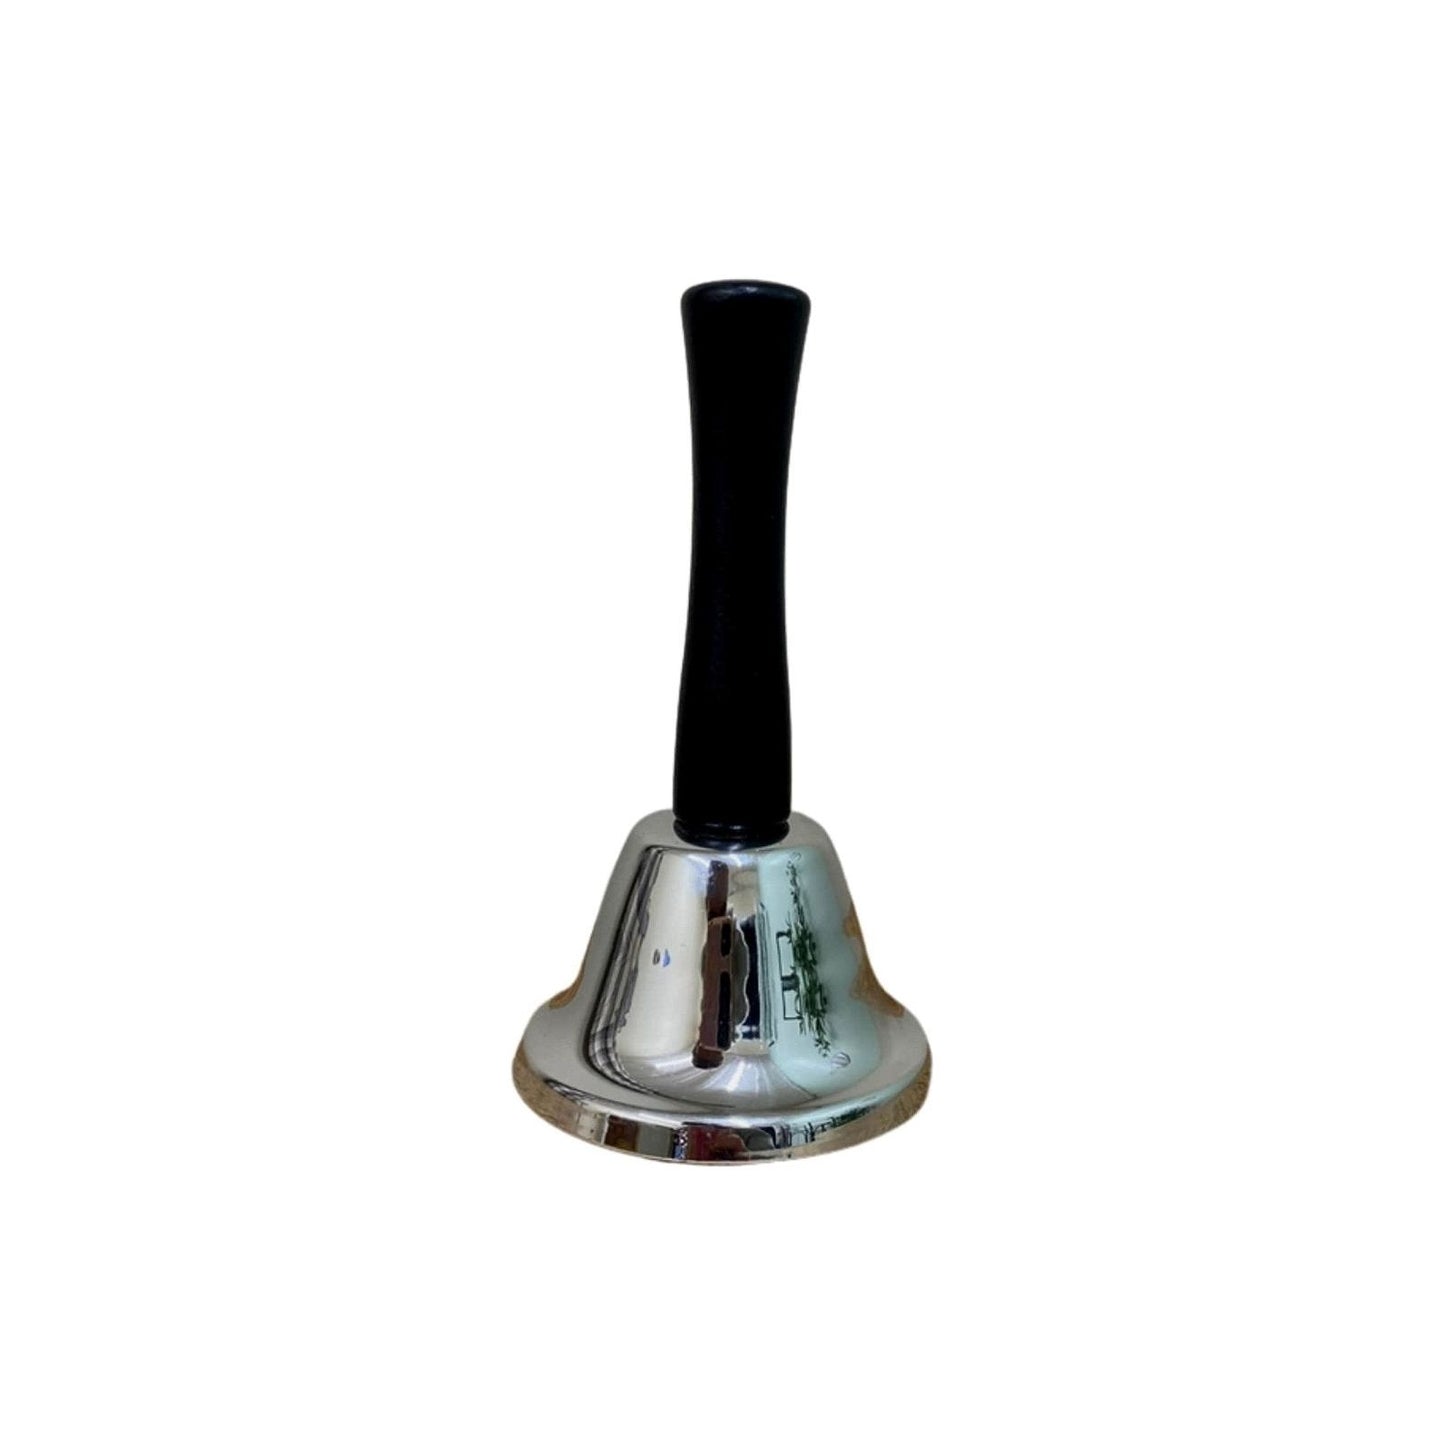 Classic Hand Bell, Black & Silver - Ashton and Finch